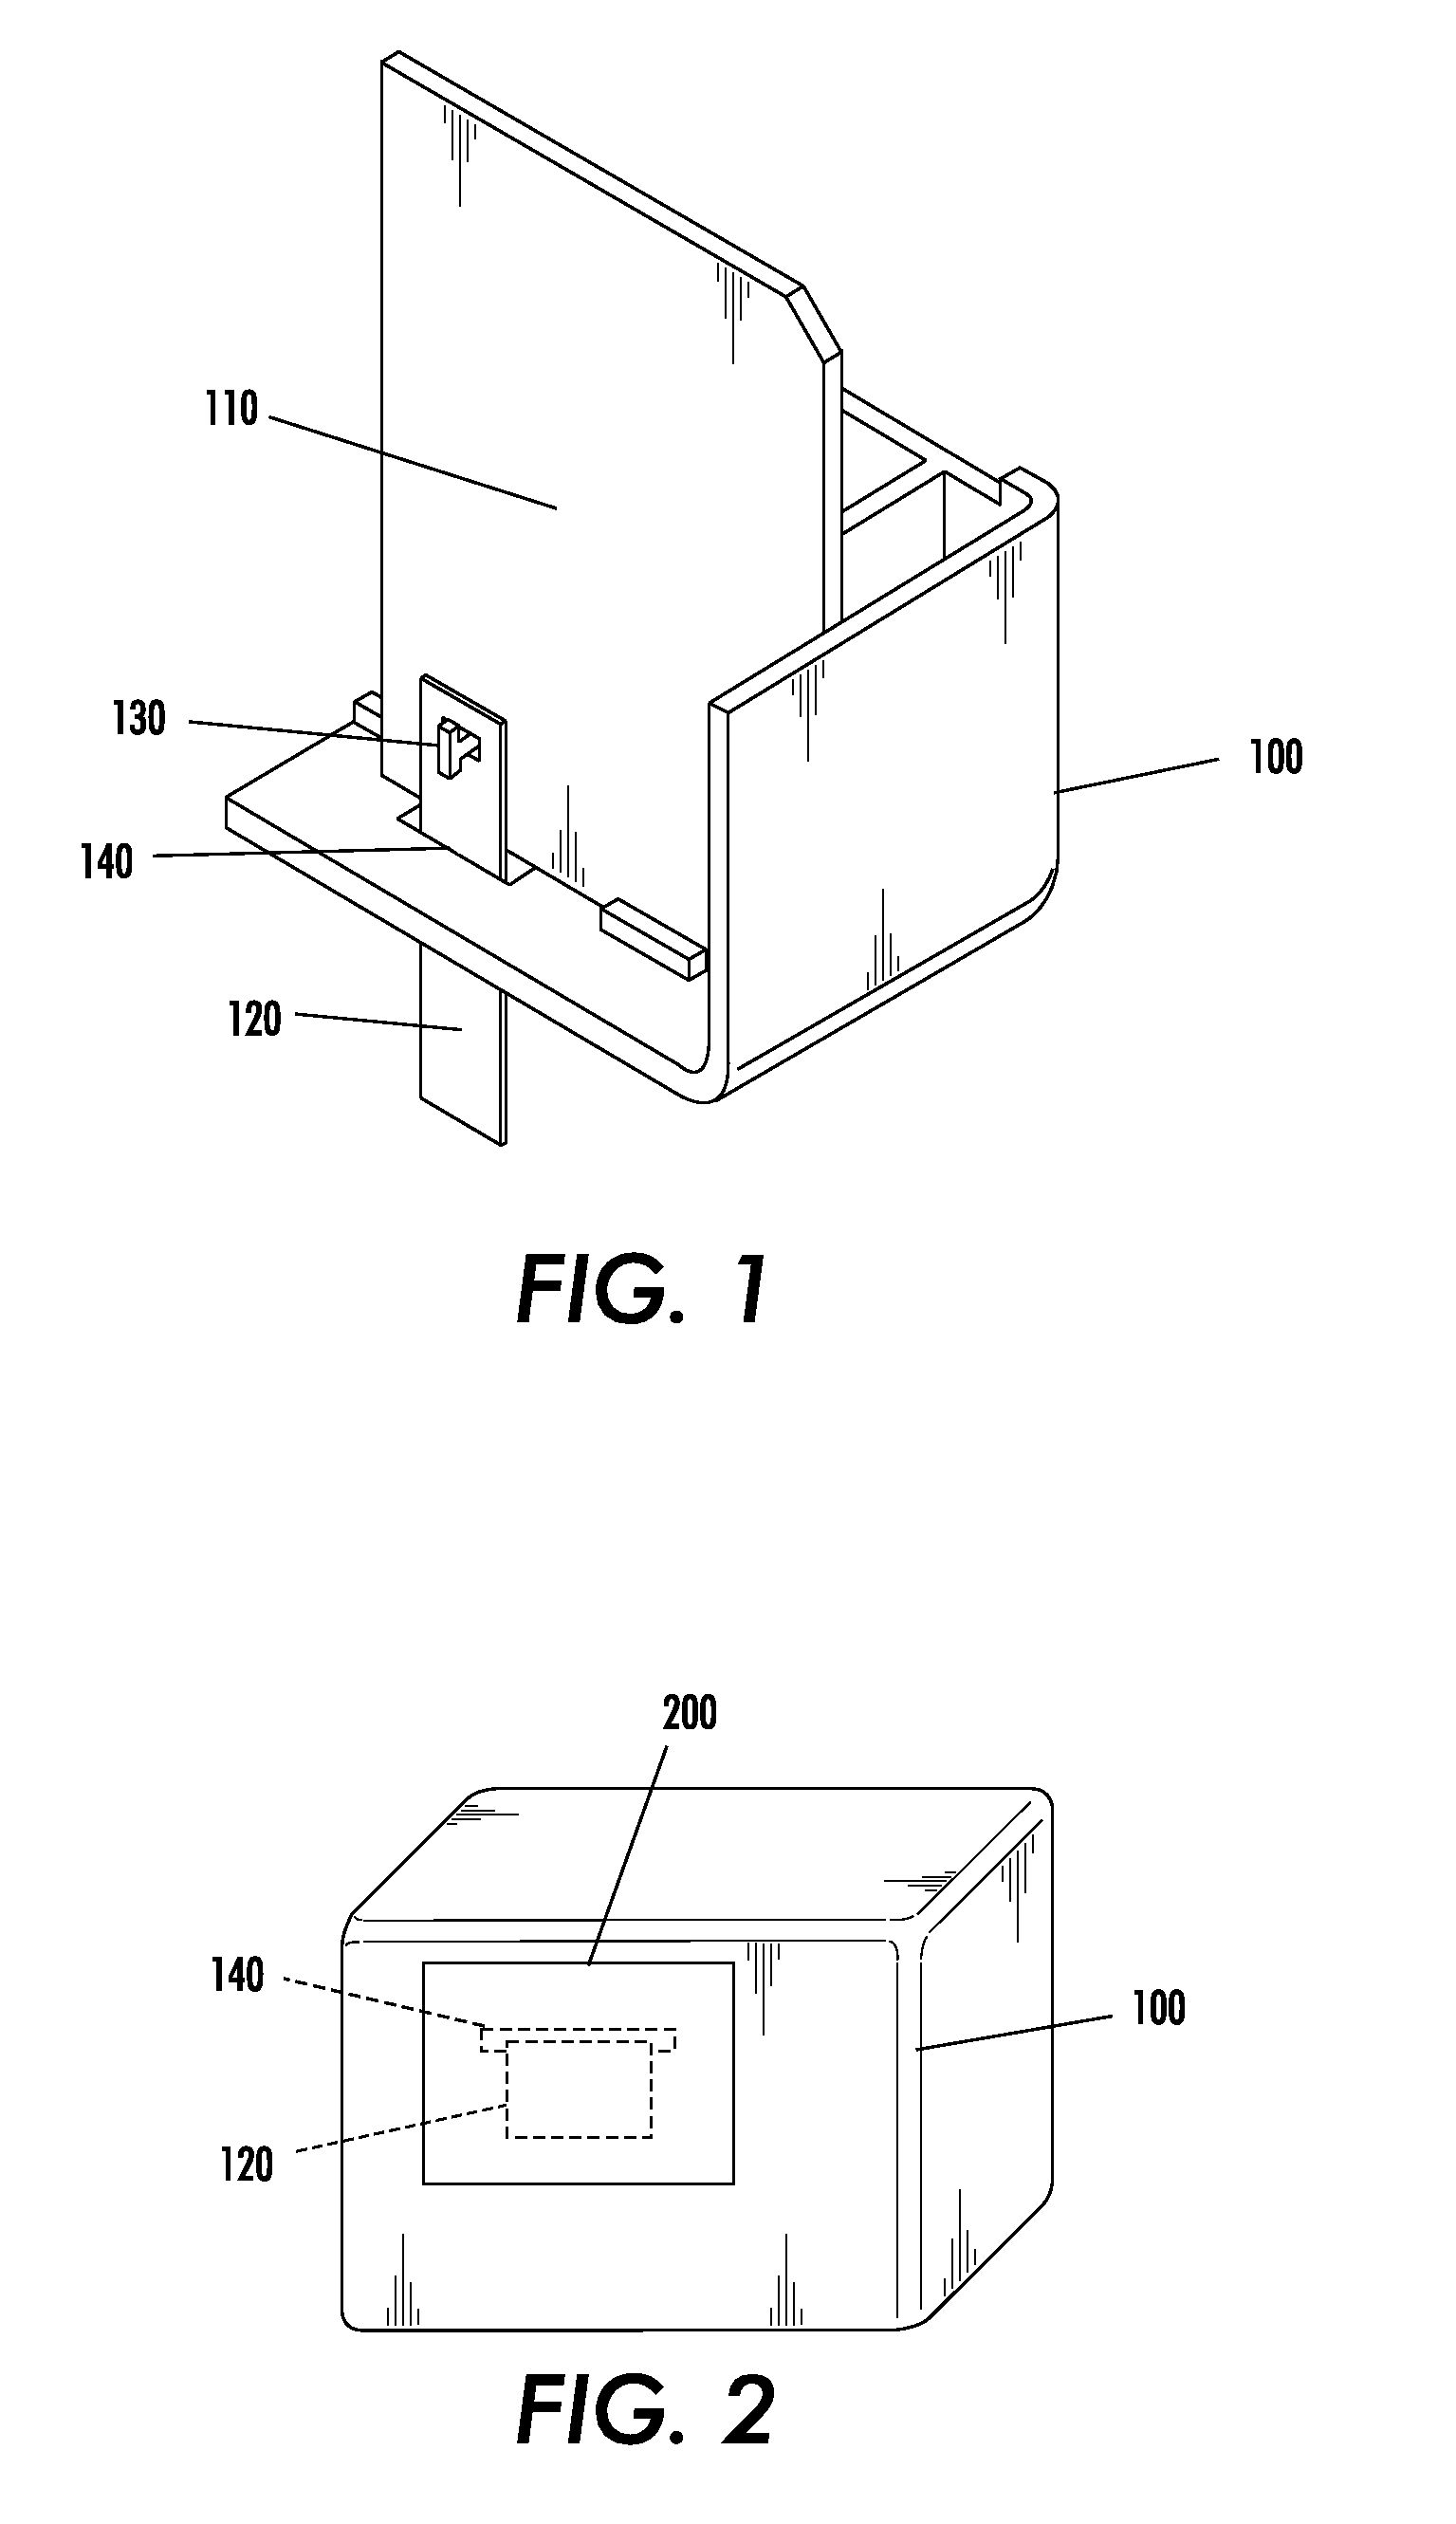 Complete discharge device